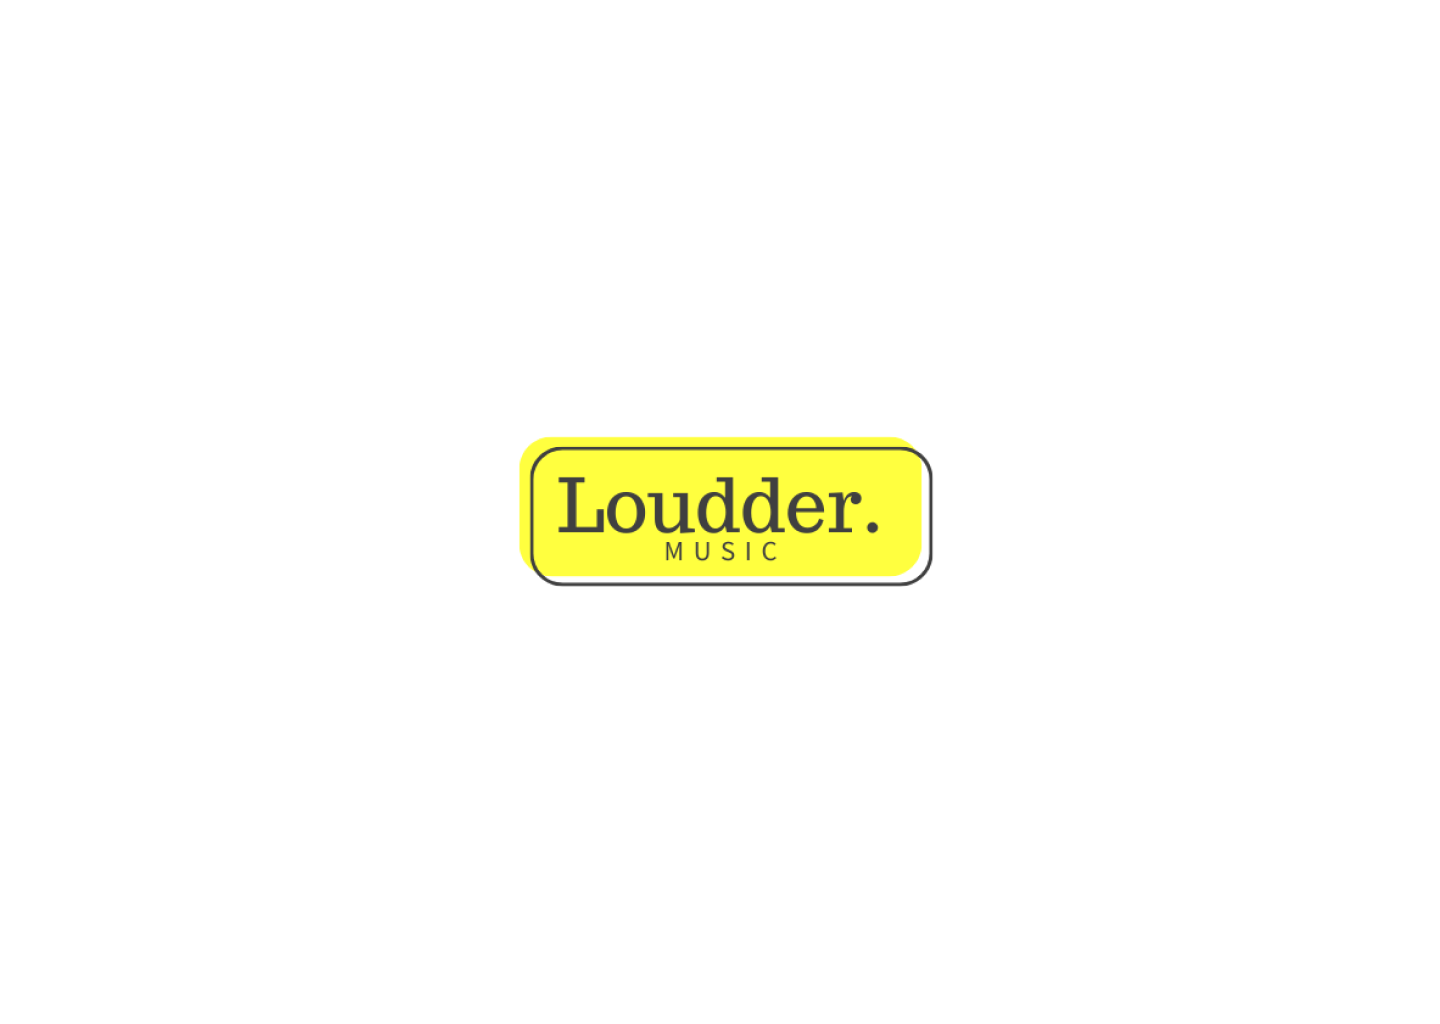 project for Loudder Music with logo